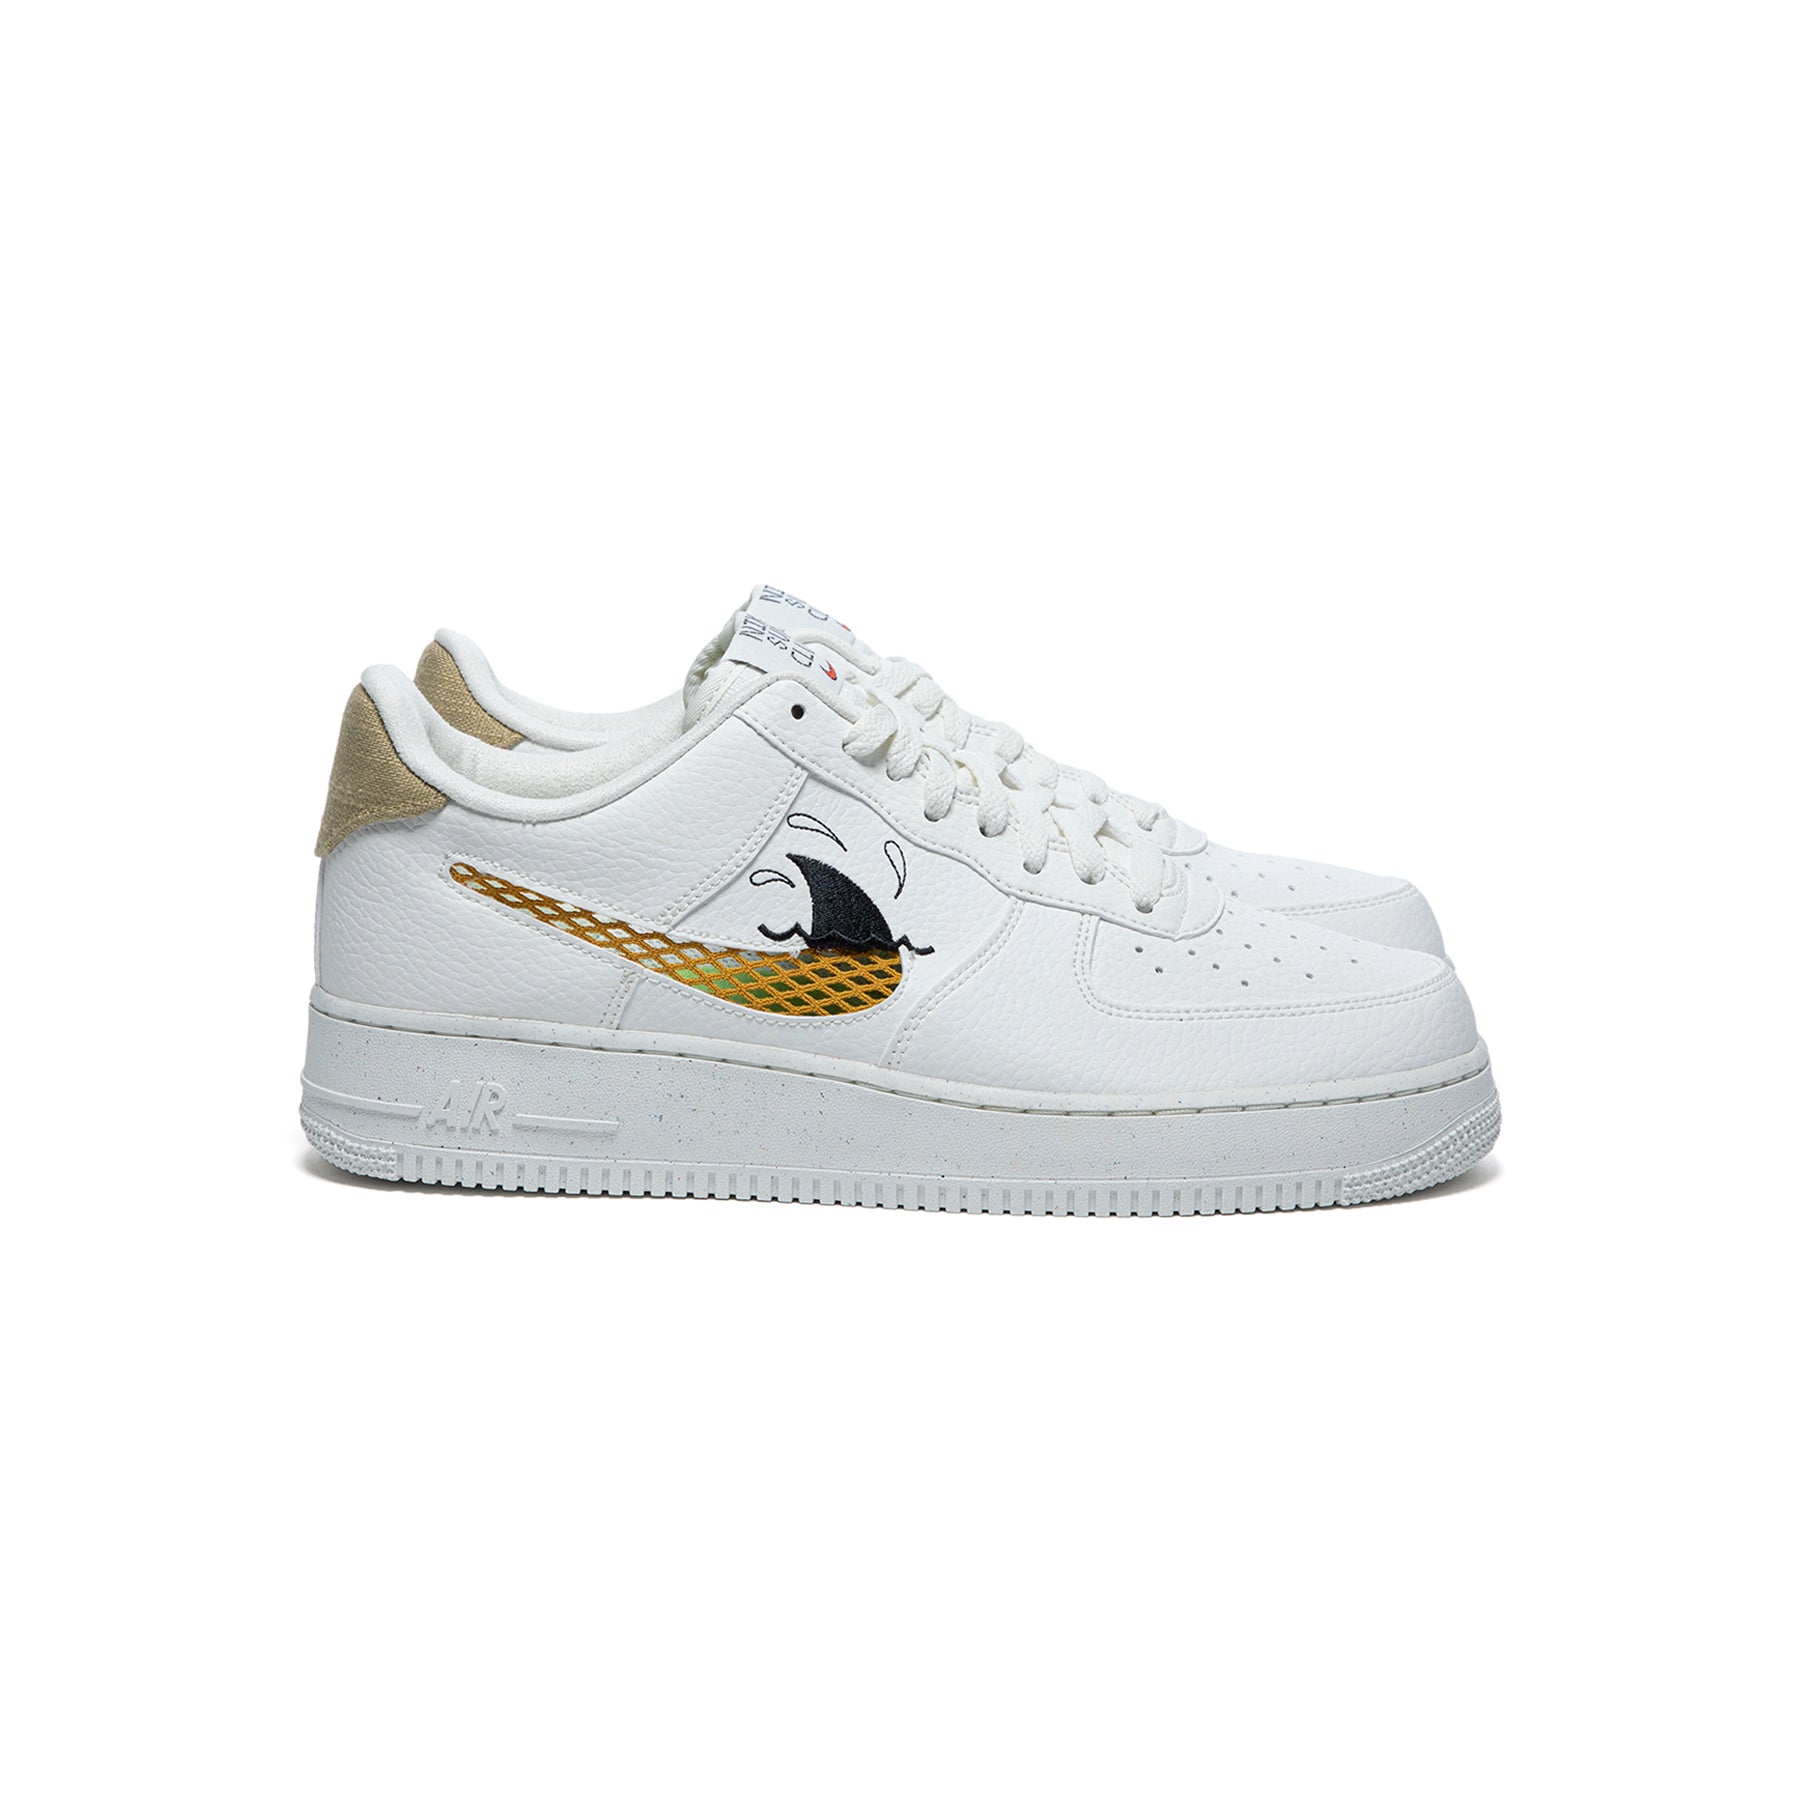 muy agradable pintor proteger Nike Air Force 1 '07 LV8 Next Nature (Sail/Sanded Gold/Black/Wheat Gra –  Concepts